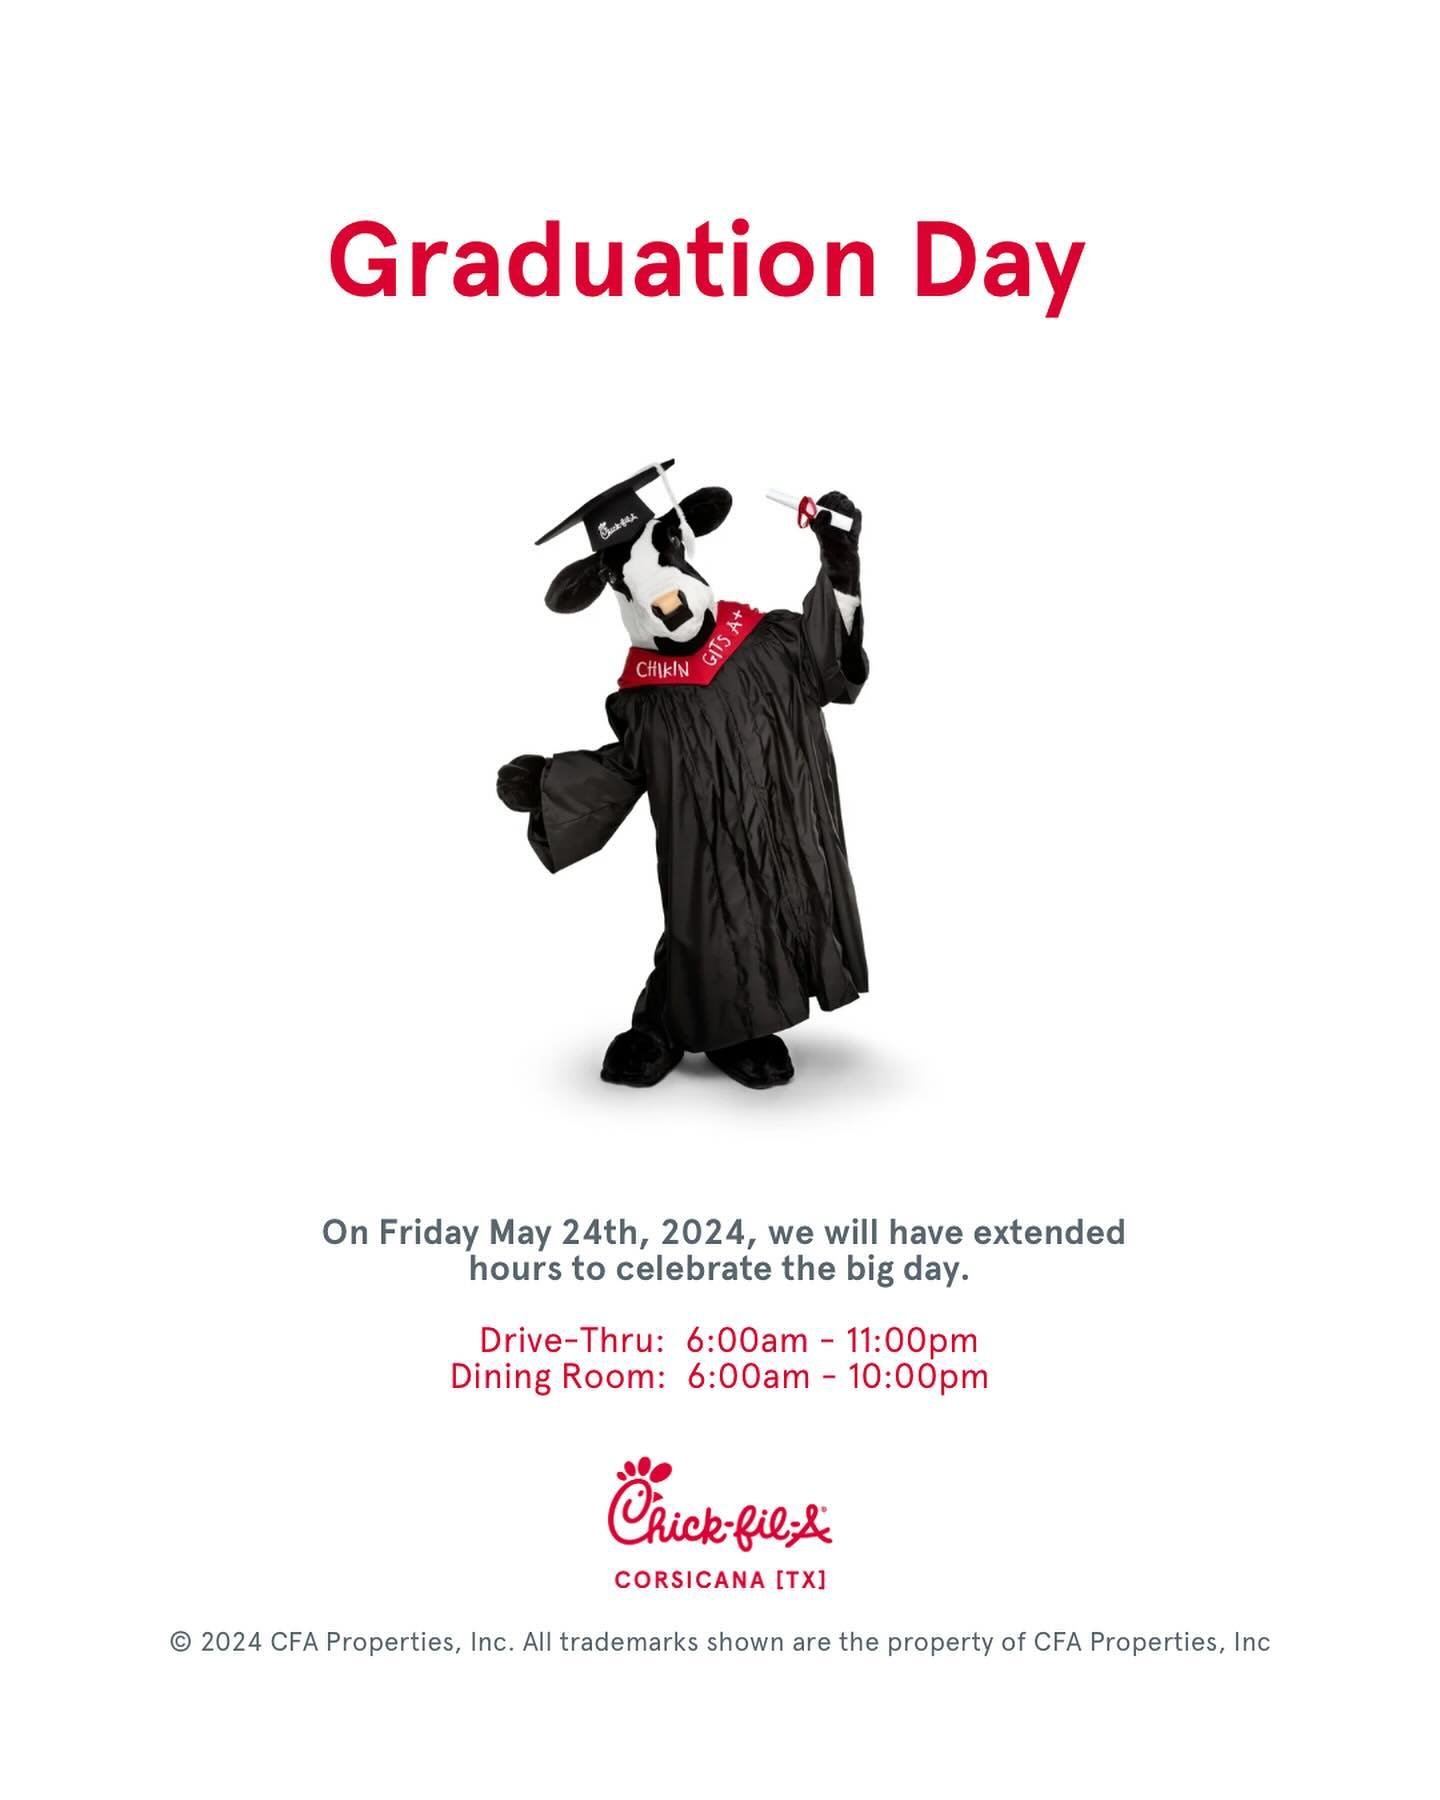 🎓🌙 Need to eat after graduation? We&rsquo;ve got you covered! Join us at as we stay open late to celebrate the big day and serve our community 🎉 

🚨🚨🚨 Giveaway Alert &mdash;Help us spread the word for a chance to win a Small Chick-fil-A Nuggets